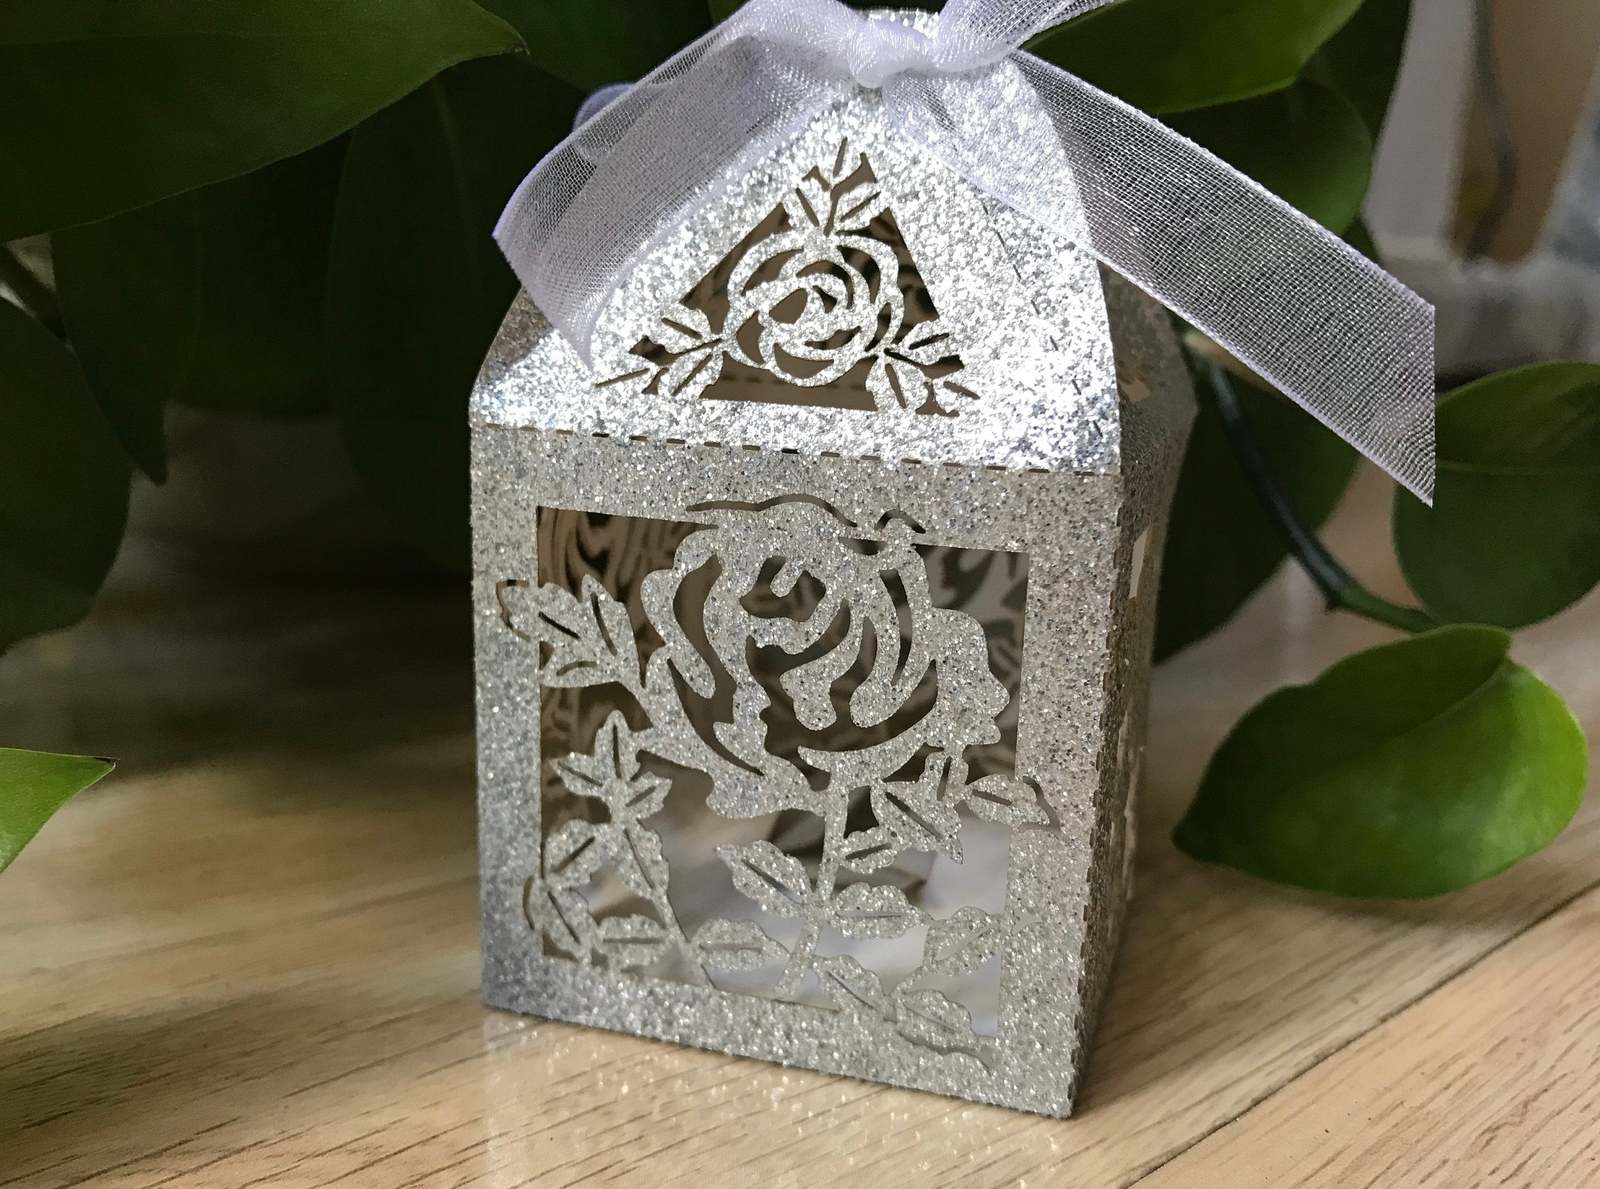 100pcs Glitter Silver Rose Laser Cut Wedding Favor Boxes,Small Gift Boxes